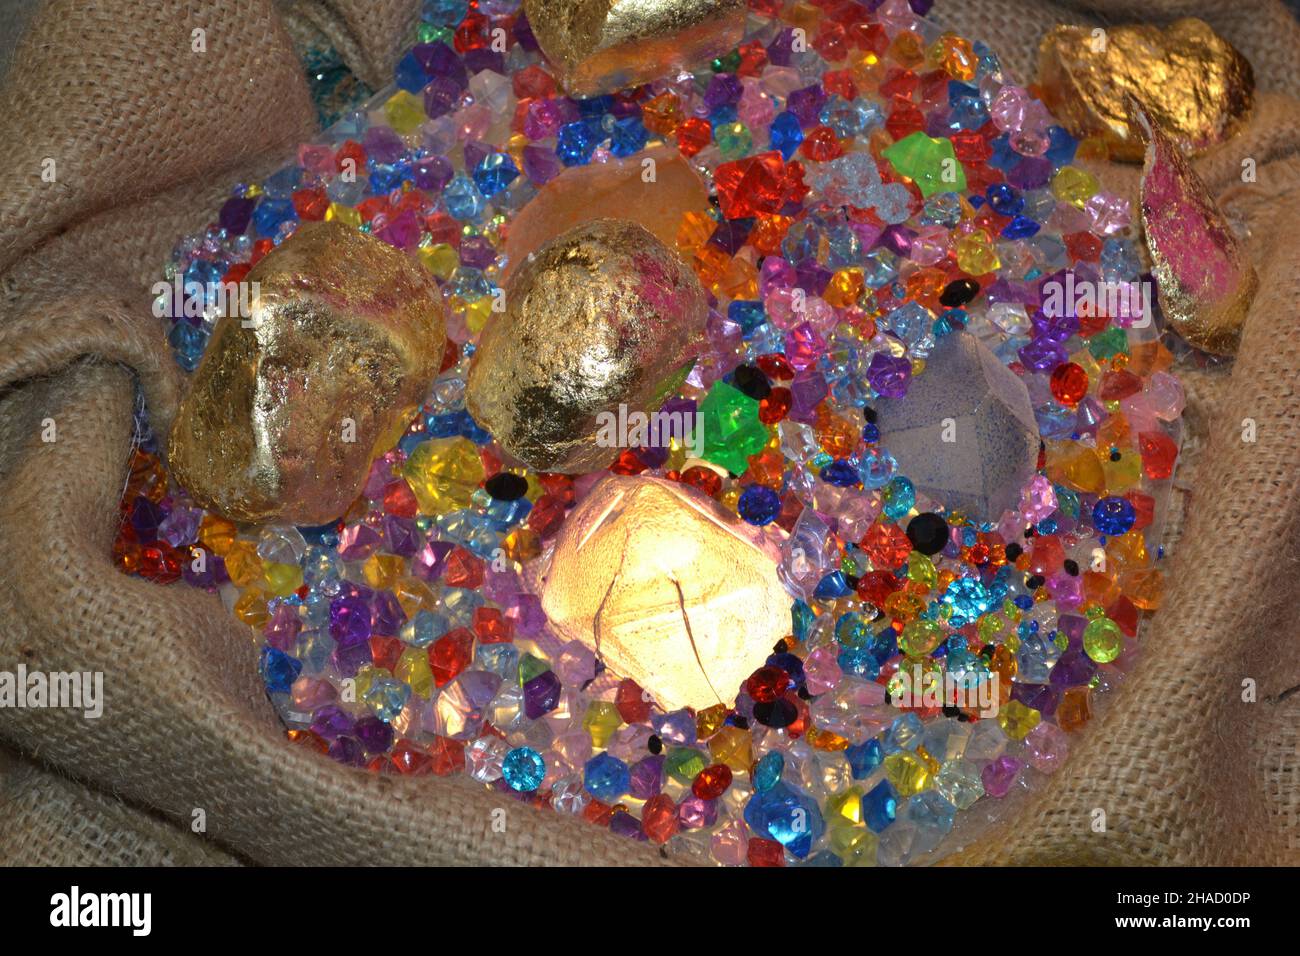 Mixed Acrylic Plastic Crystal Gems as Treasure Hunting Pirate Jewelry in Burlap Sack for Fashion Store Window Merchandising. Glow in the Dark. Stock Photo